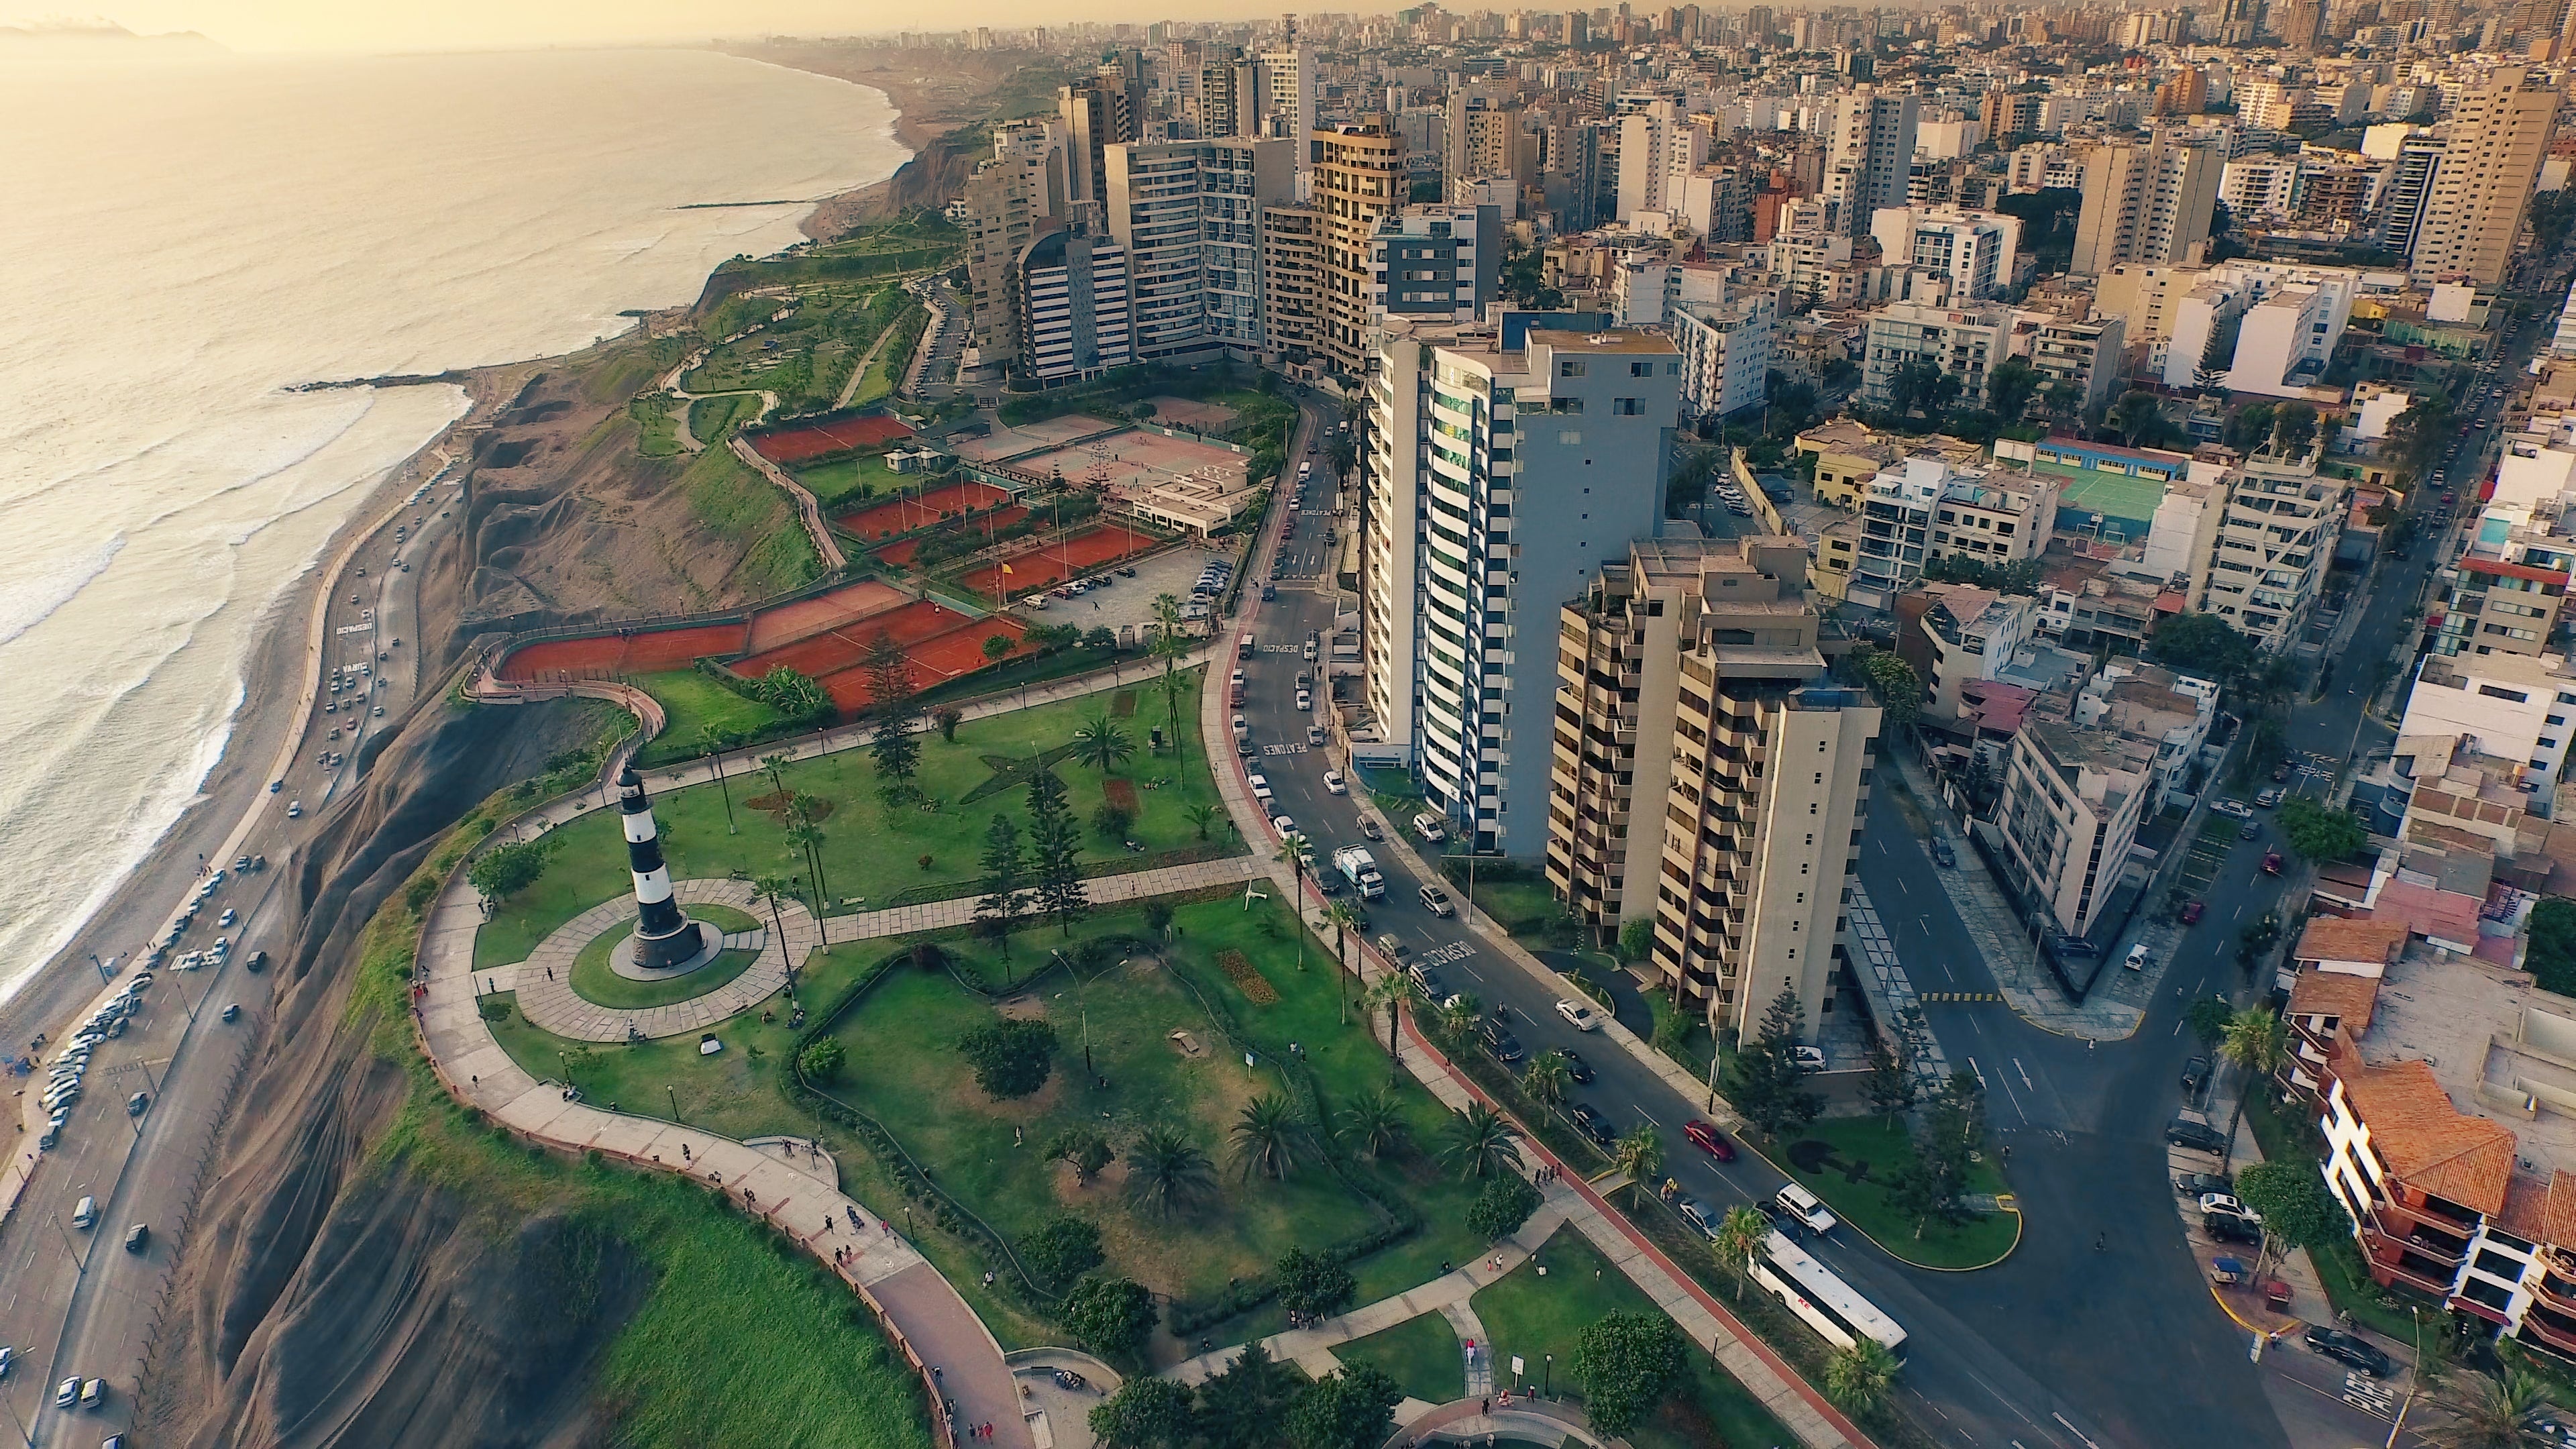 Lima (Peru), Exciting new airline routes, Traveler's delight, South American adventure, 3840x2160 4K Desktop